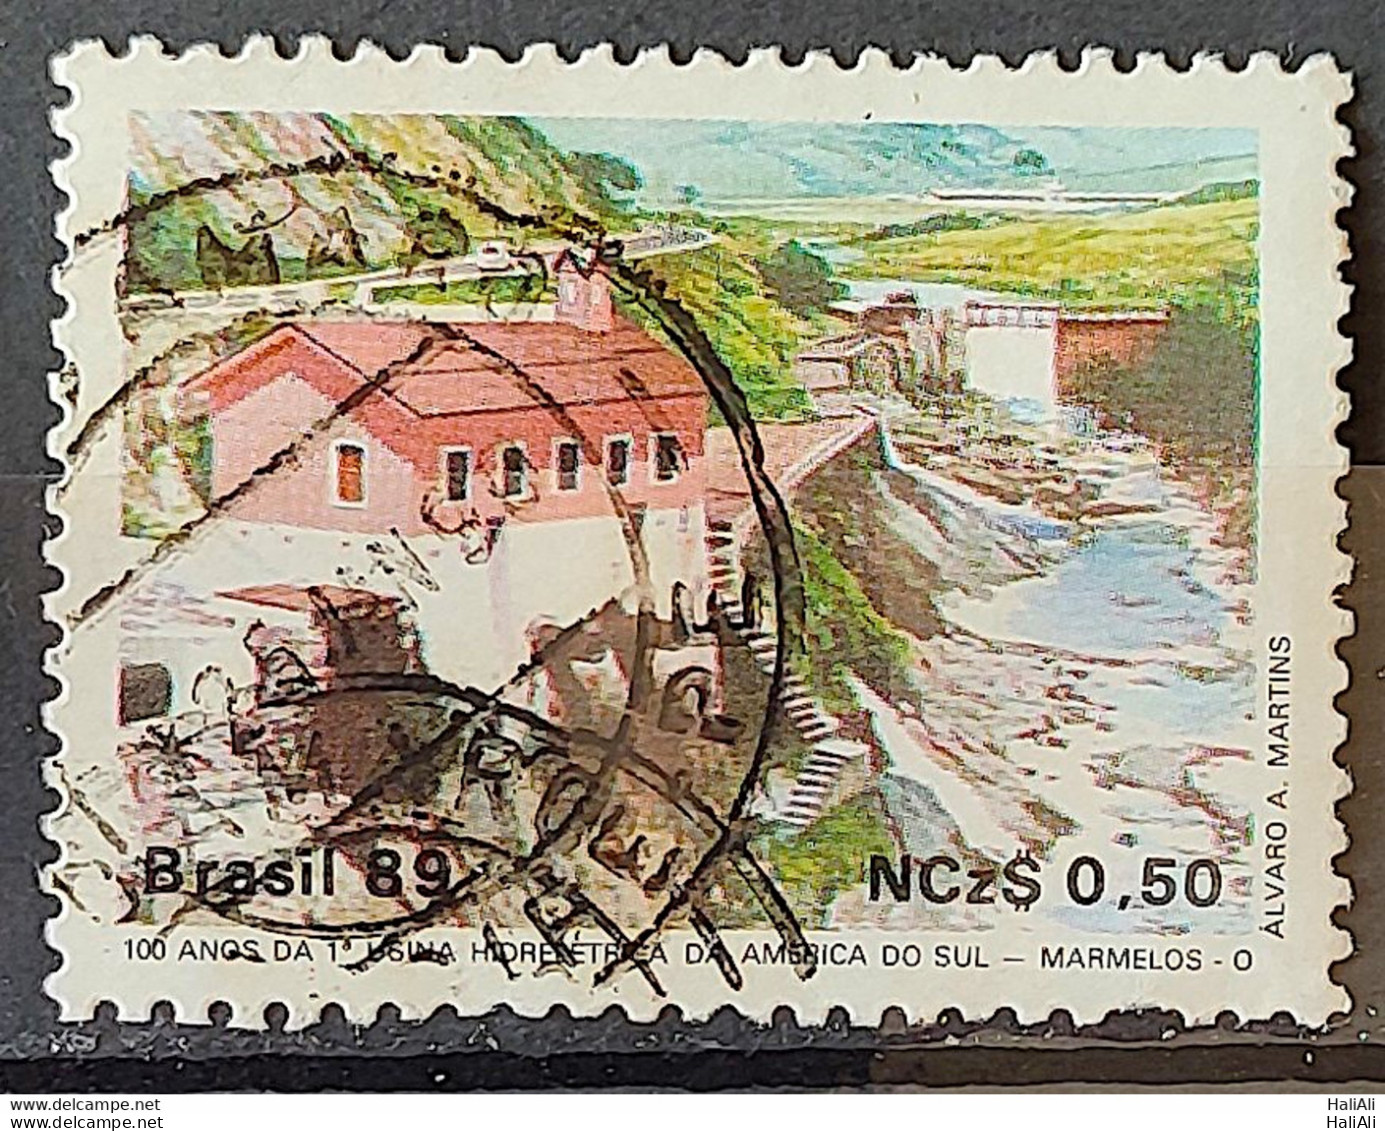 C 1644 Brazil Stamp 100 Years Hydroelectric Marmelos Energy Electricity Juiz De Fora 1989 Circulated 18 - Usati